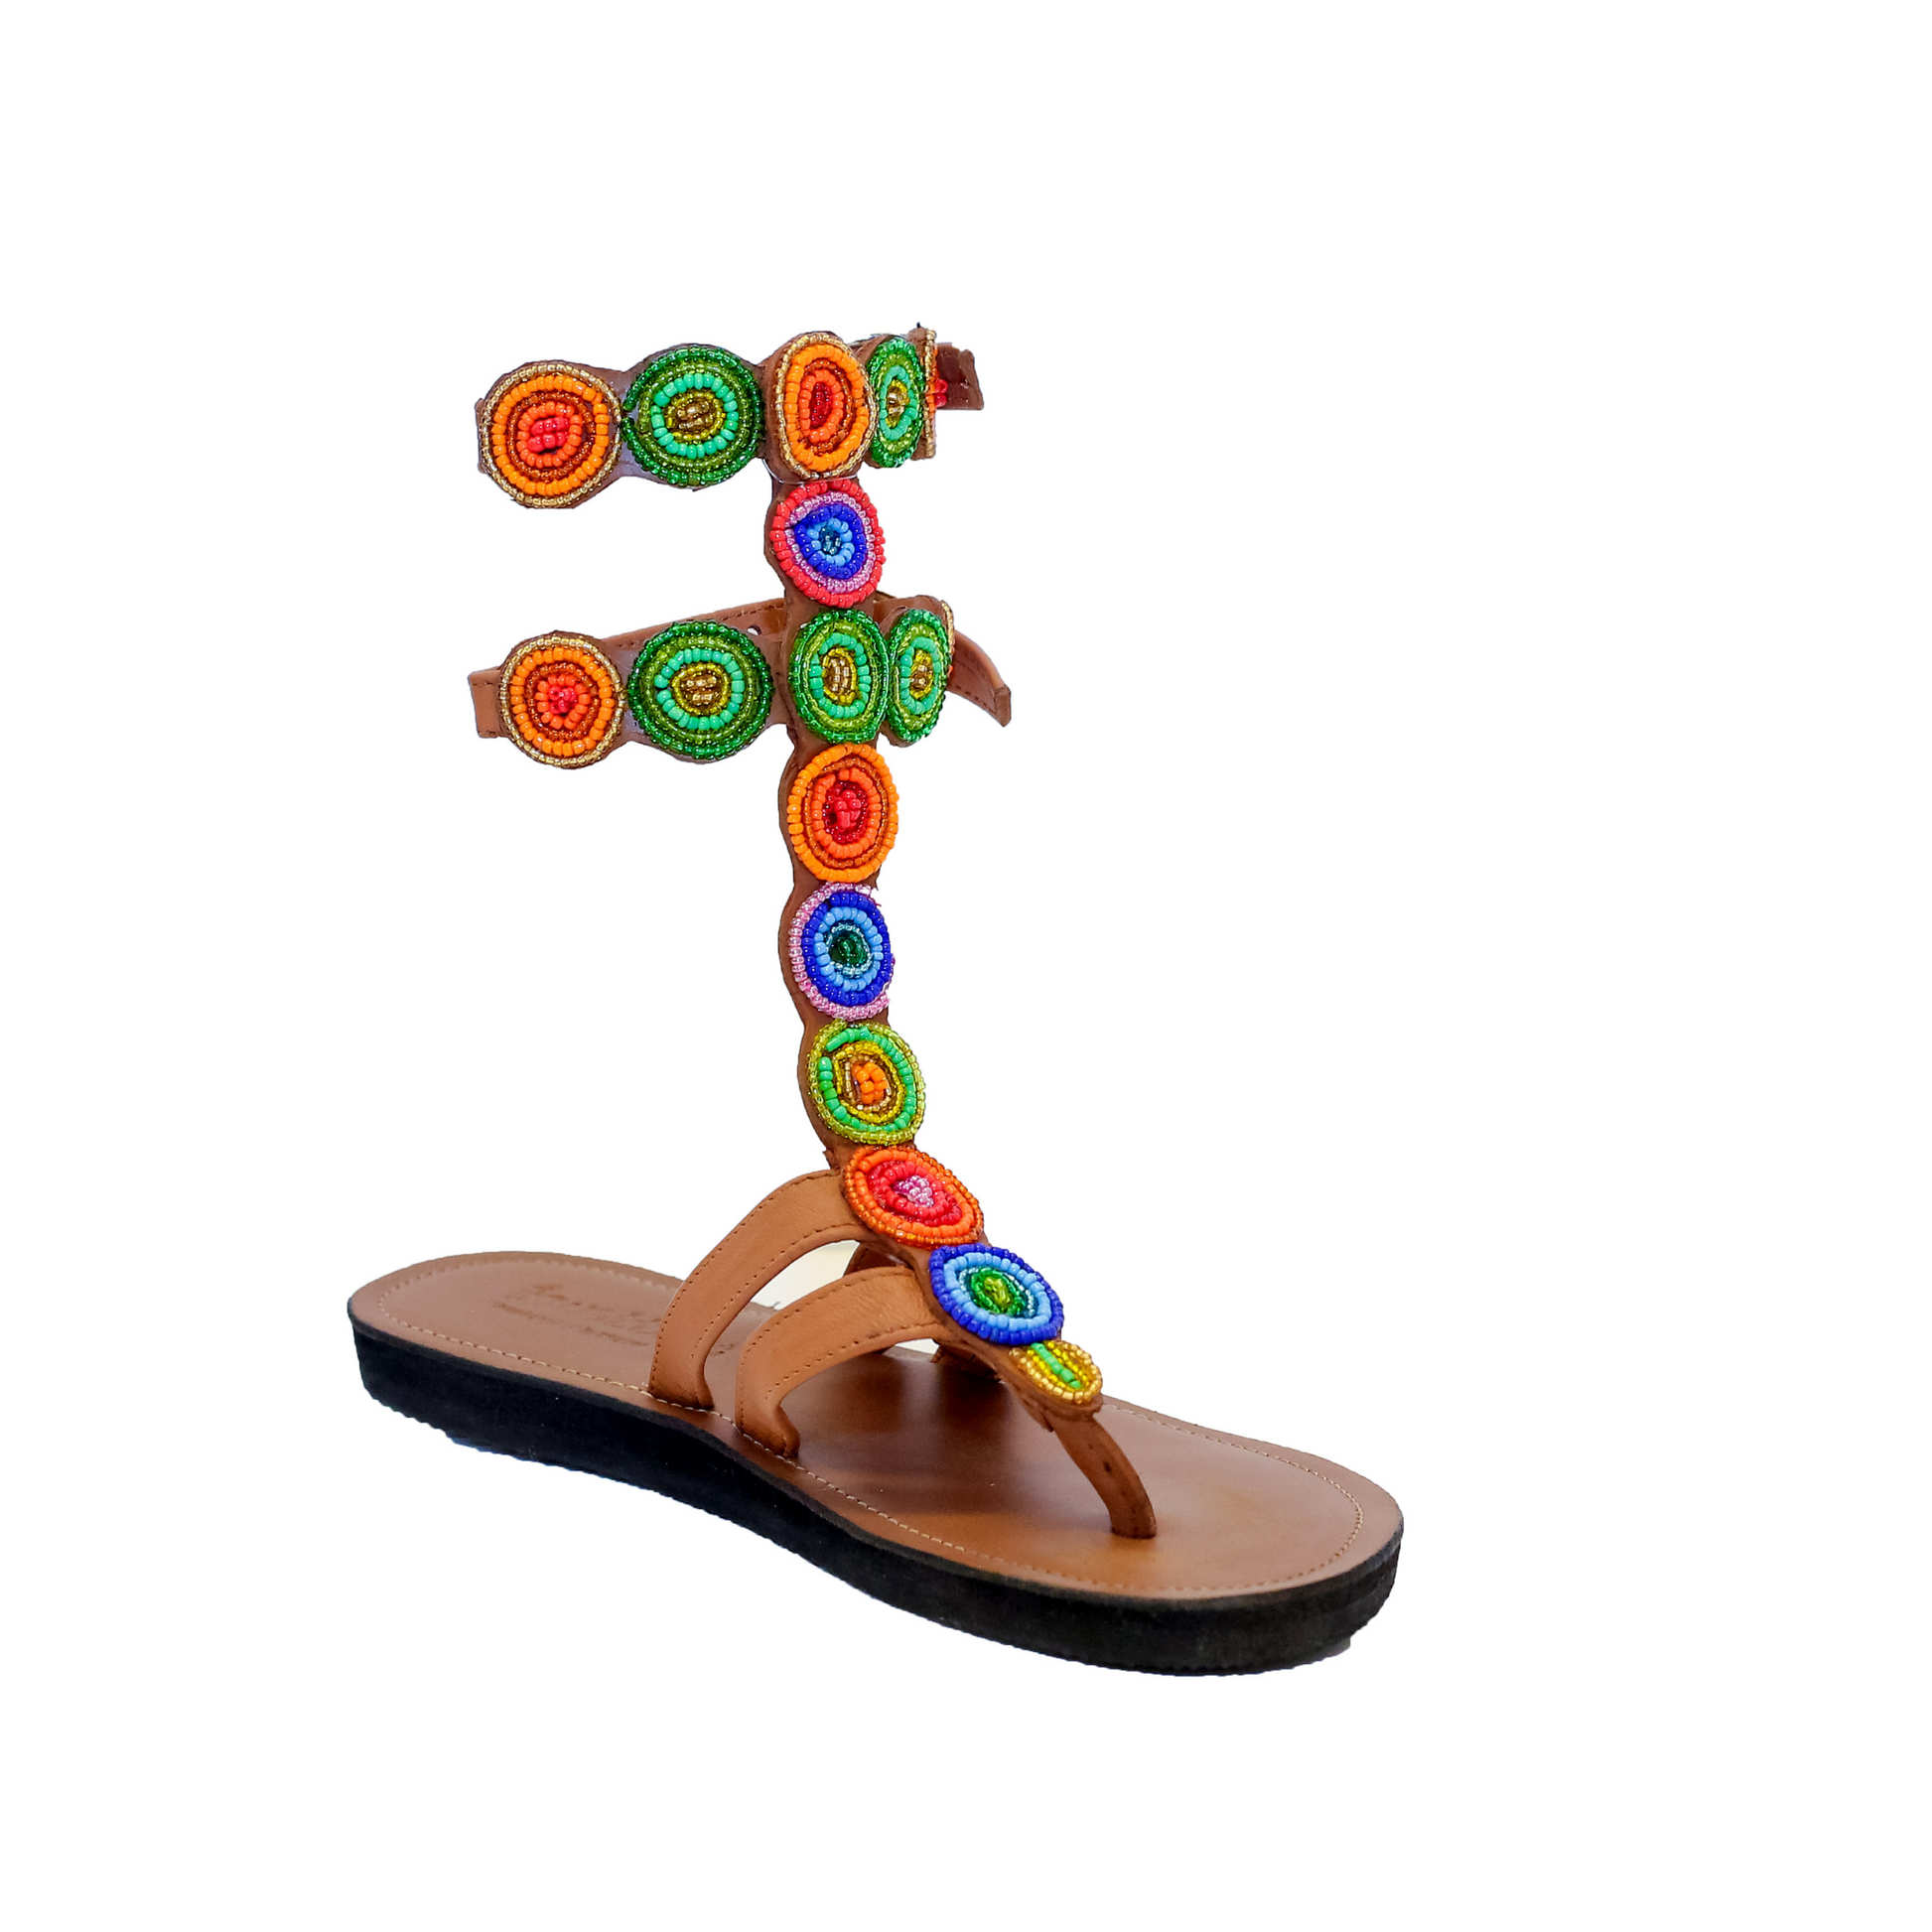 Fighter olympus gladiator sandals in caramel smooth leather with Maasai beaded straps